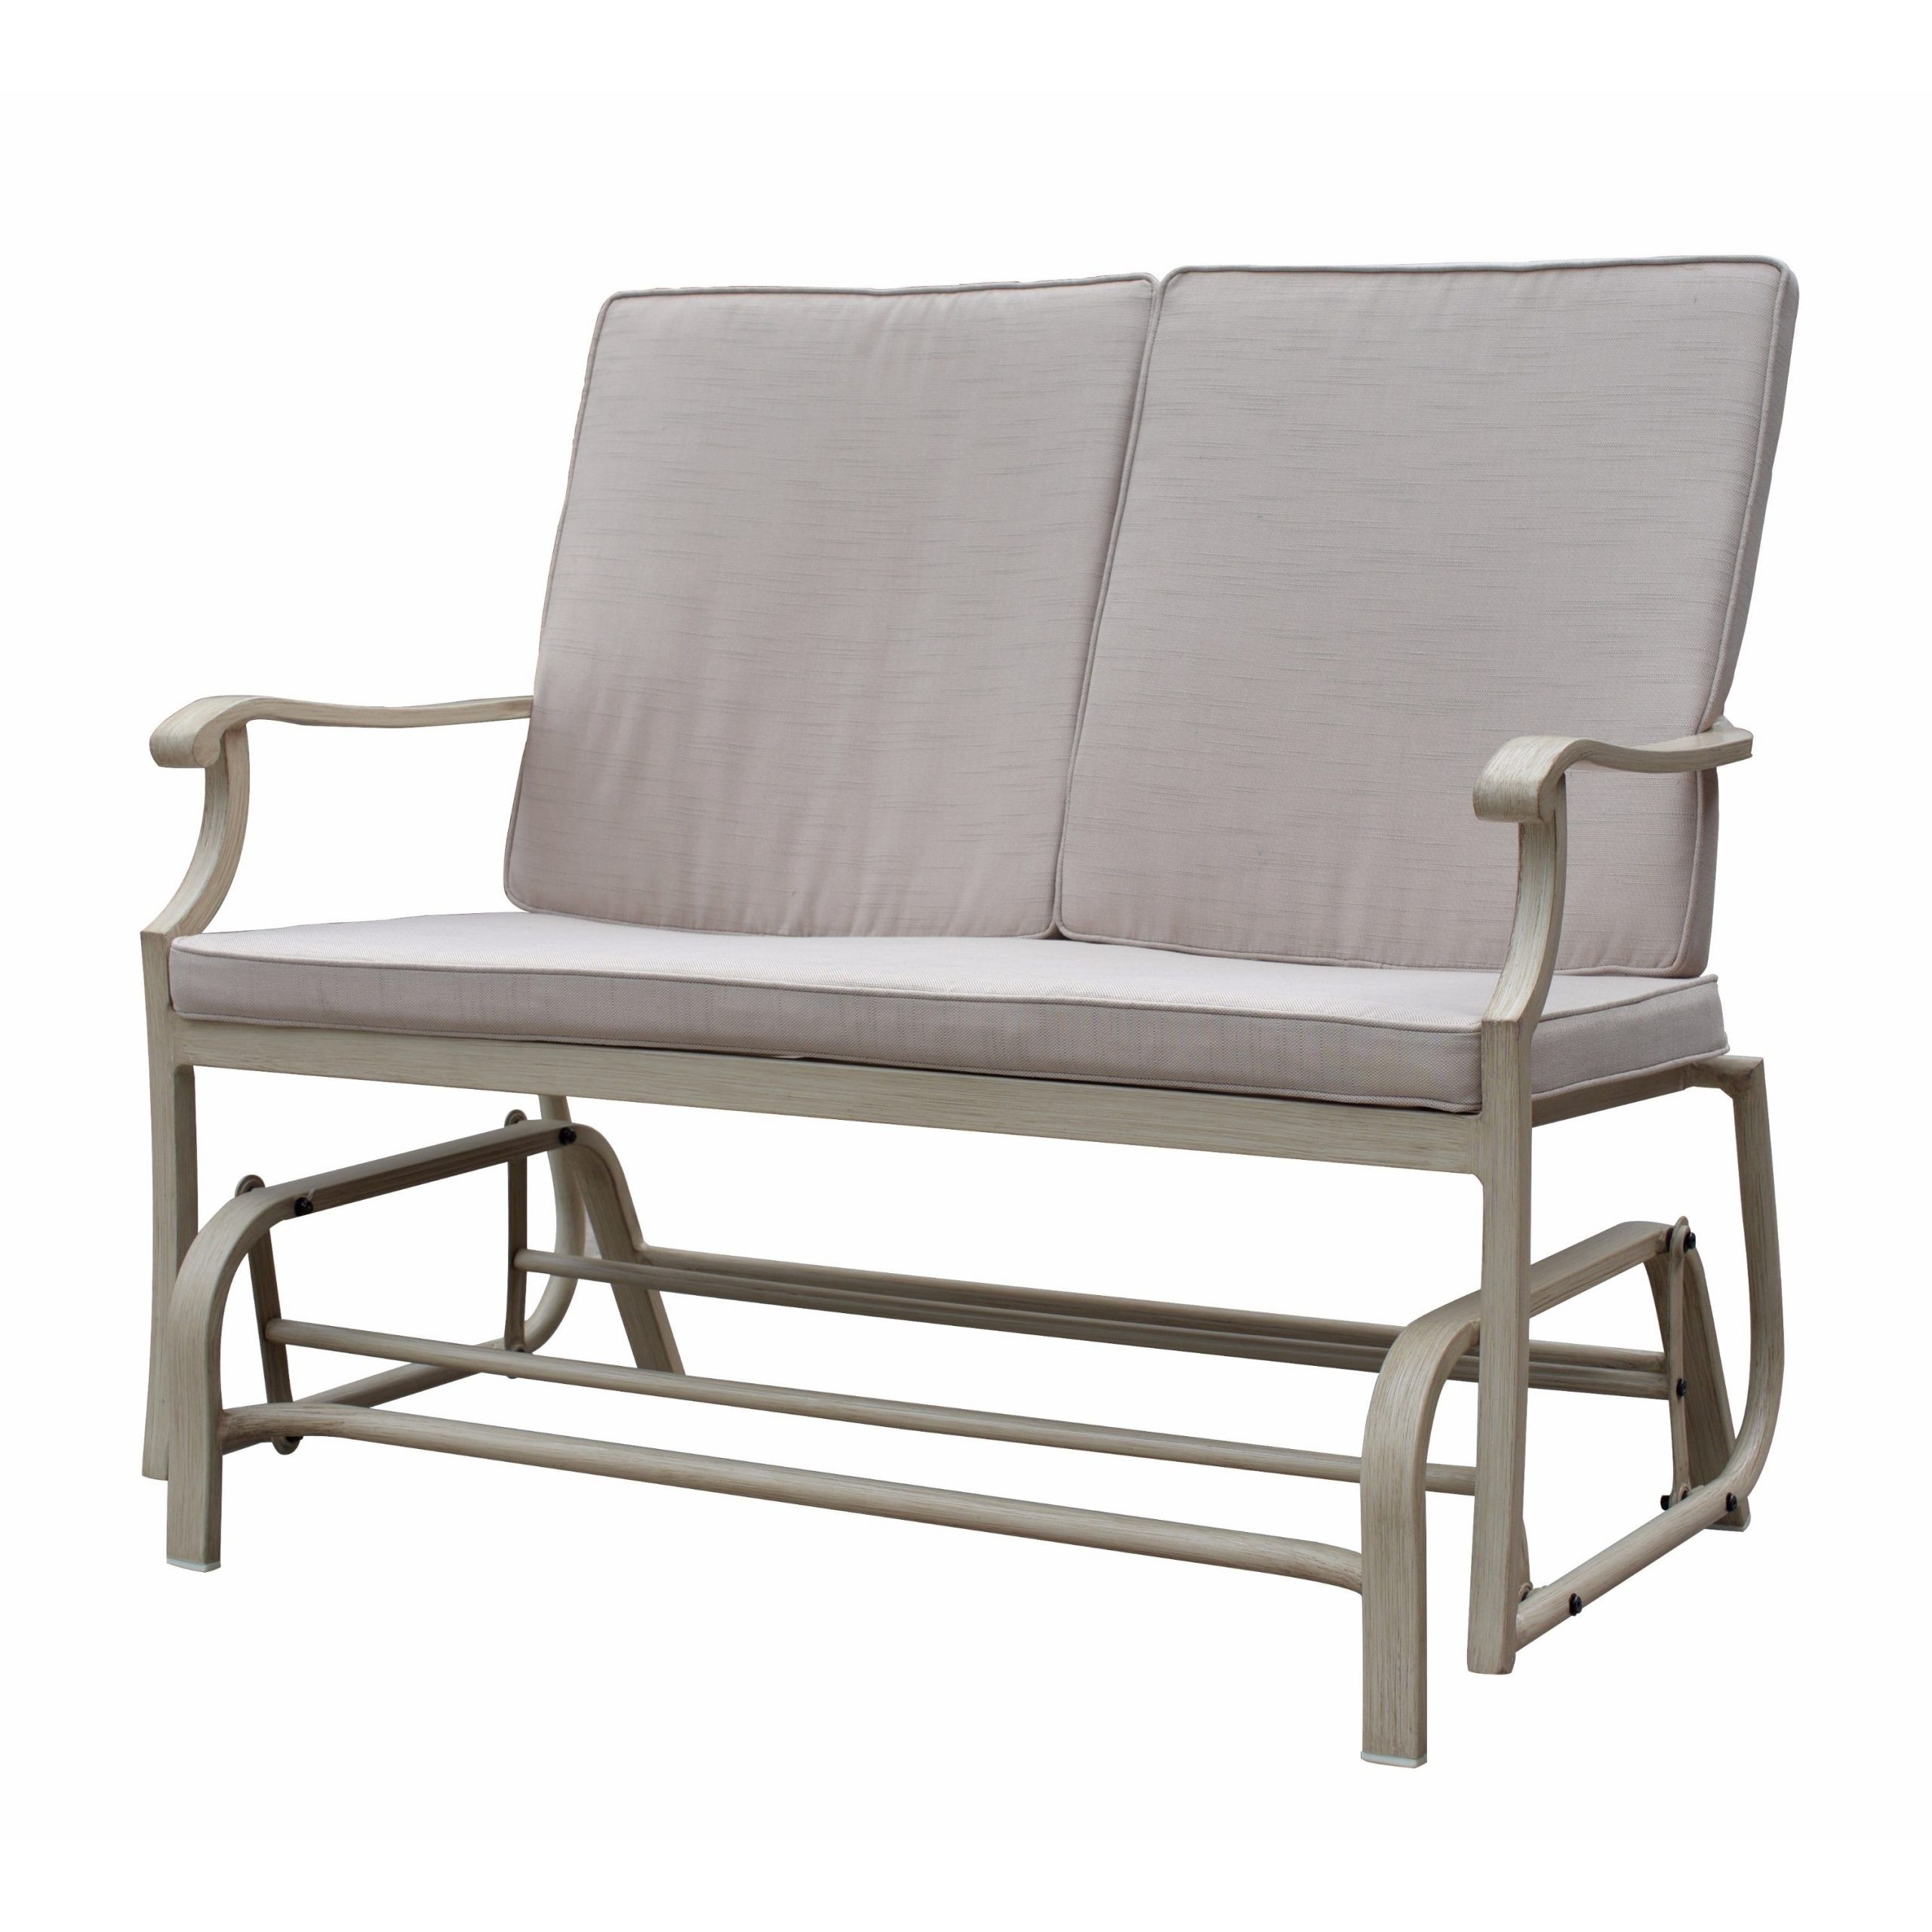 Courtyard Casual Camel Torino Aluminum Outdoor Double Glider Intended For Aluminum Glider Benches With Cushion (View 11 of 25)